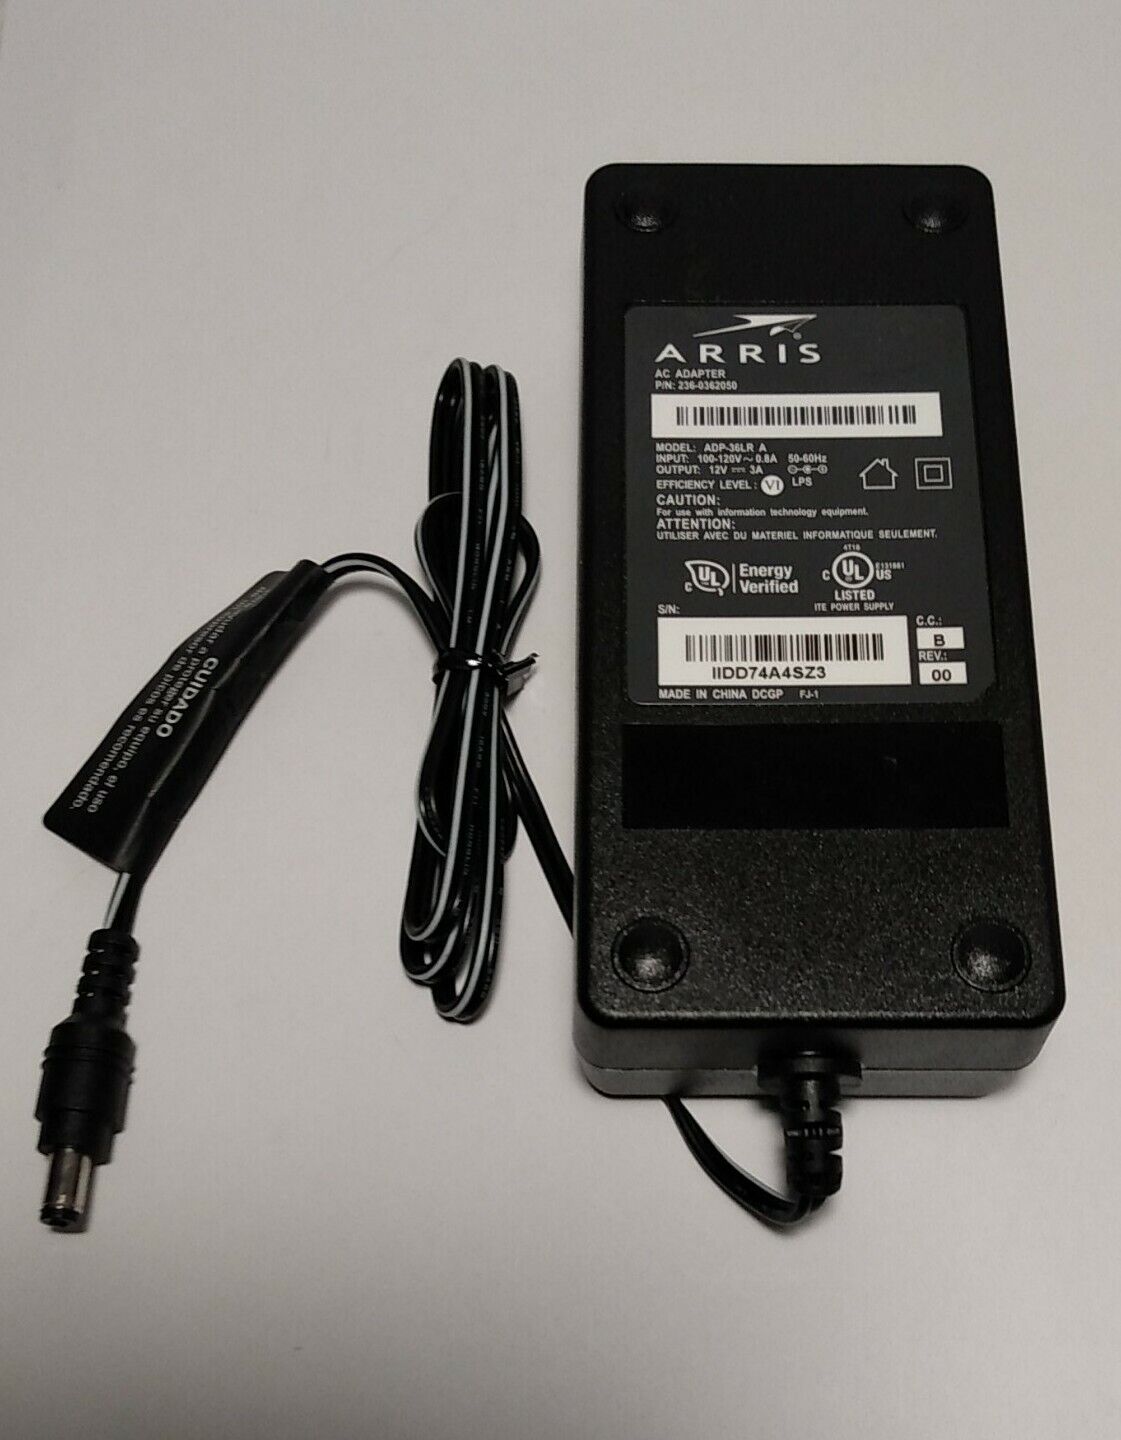 Arris AC Adapter ADP-36LR 12V 3A Power Supply (with Power Cord) Brand: Arris Type: AC ADAPTER Custom Bundle: No C